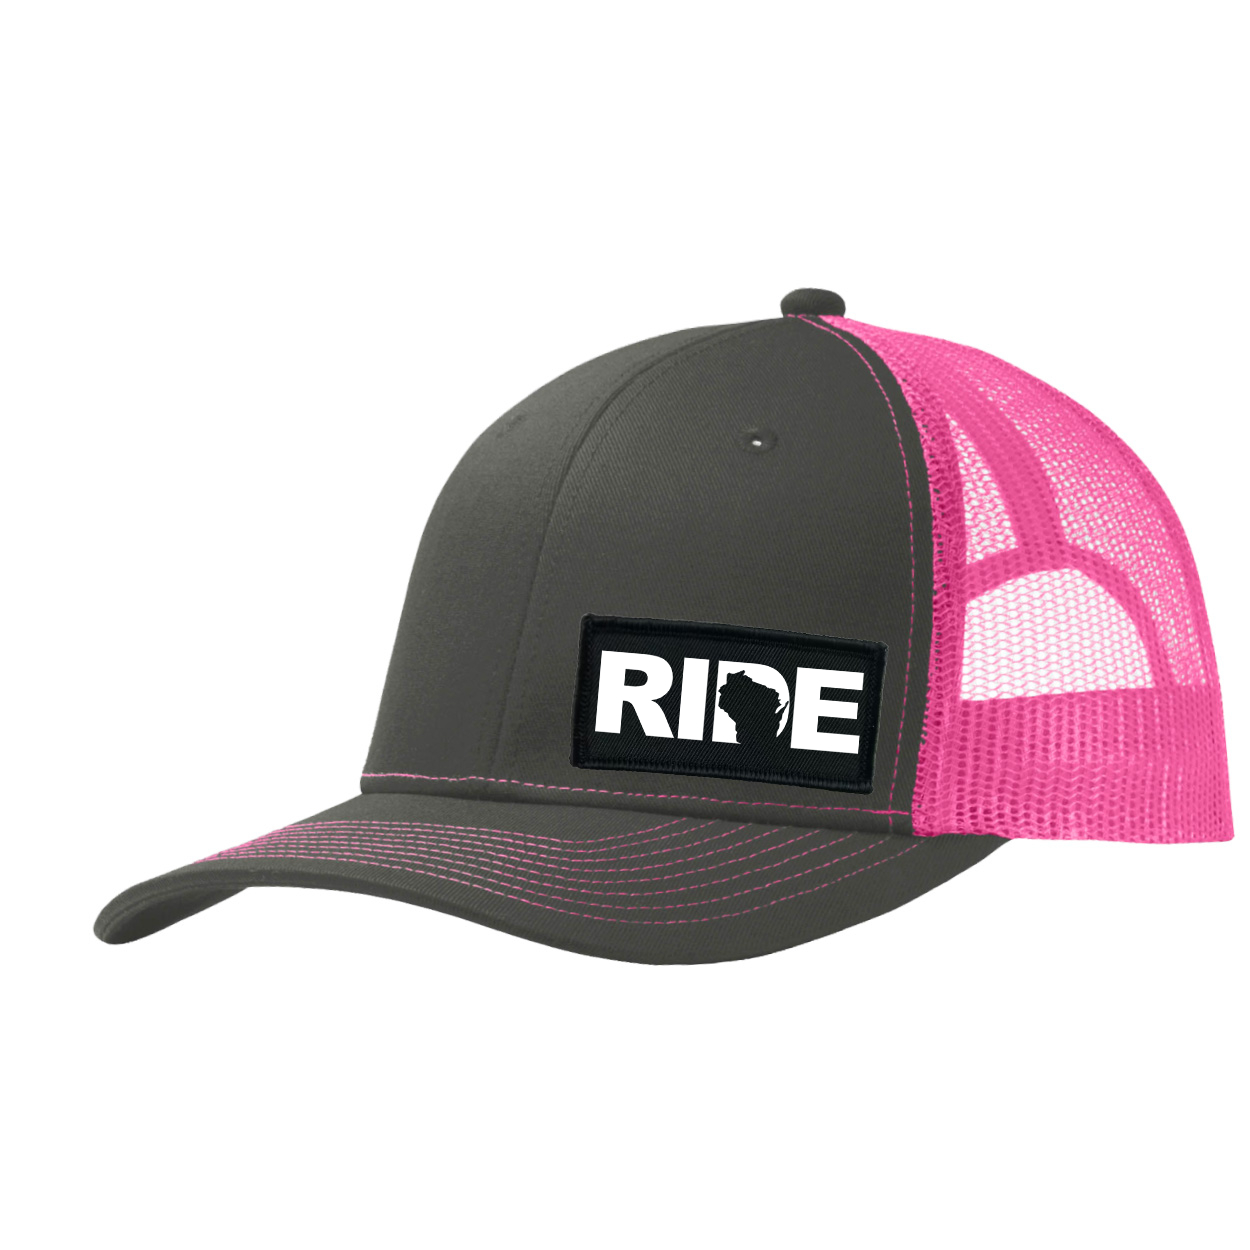 Ride Wisconsin Night Out Woven Patch Snapback Trucker Hat Dark Gray/Neon Pink (White Logo)